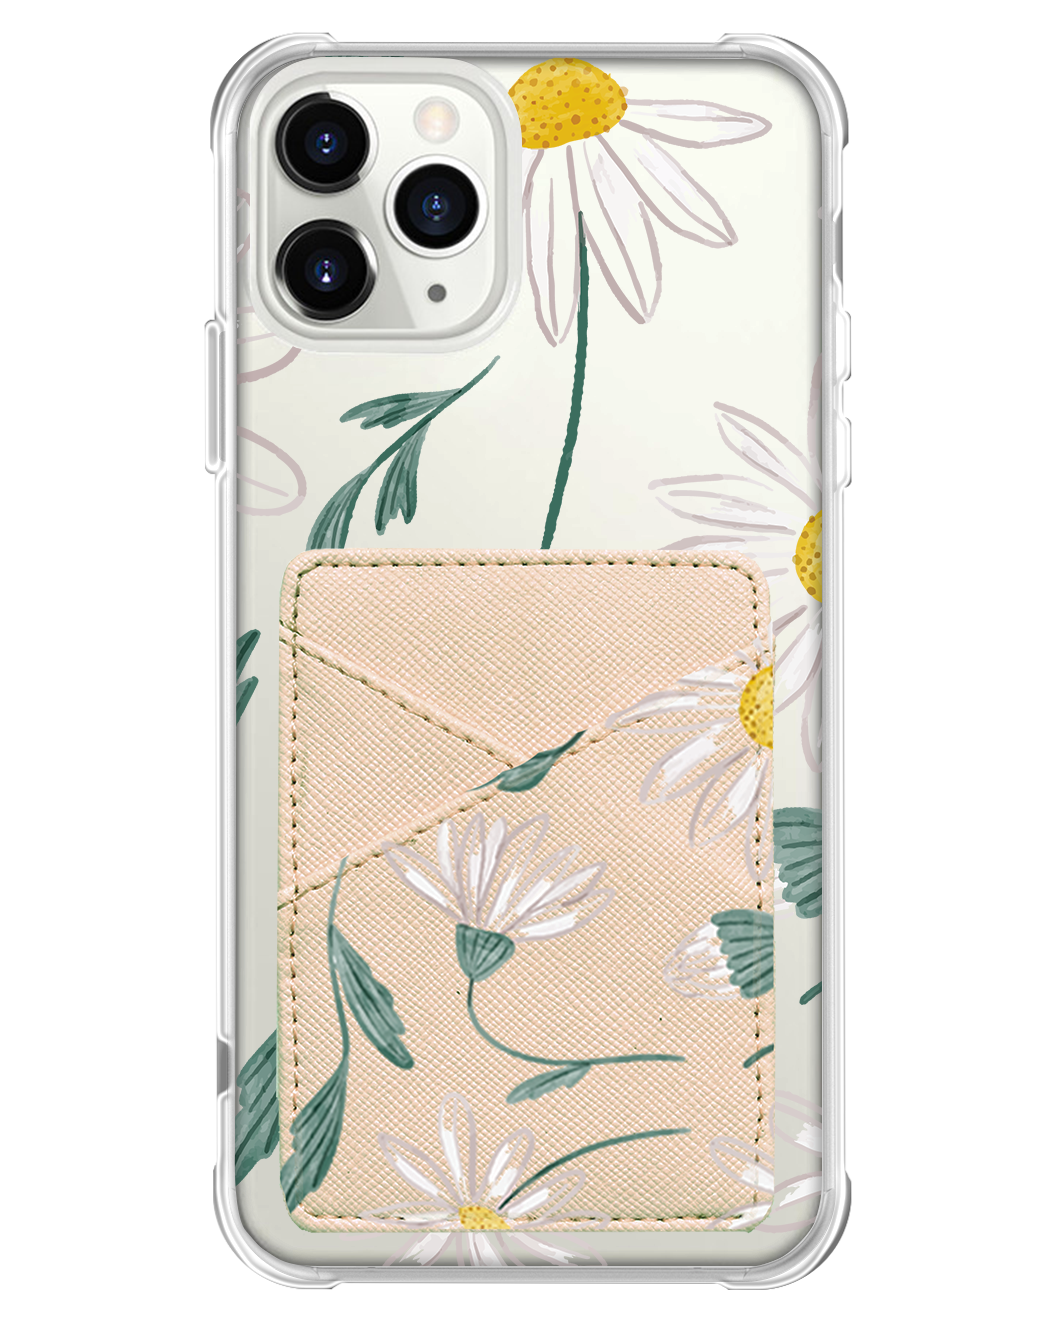 iPhone Phone Wallet Case - April Daisy 2.0